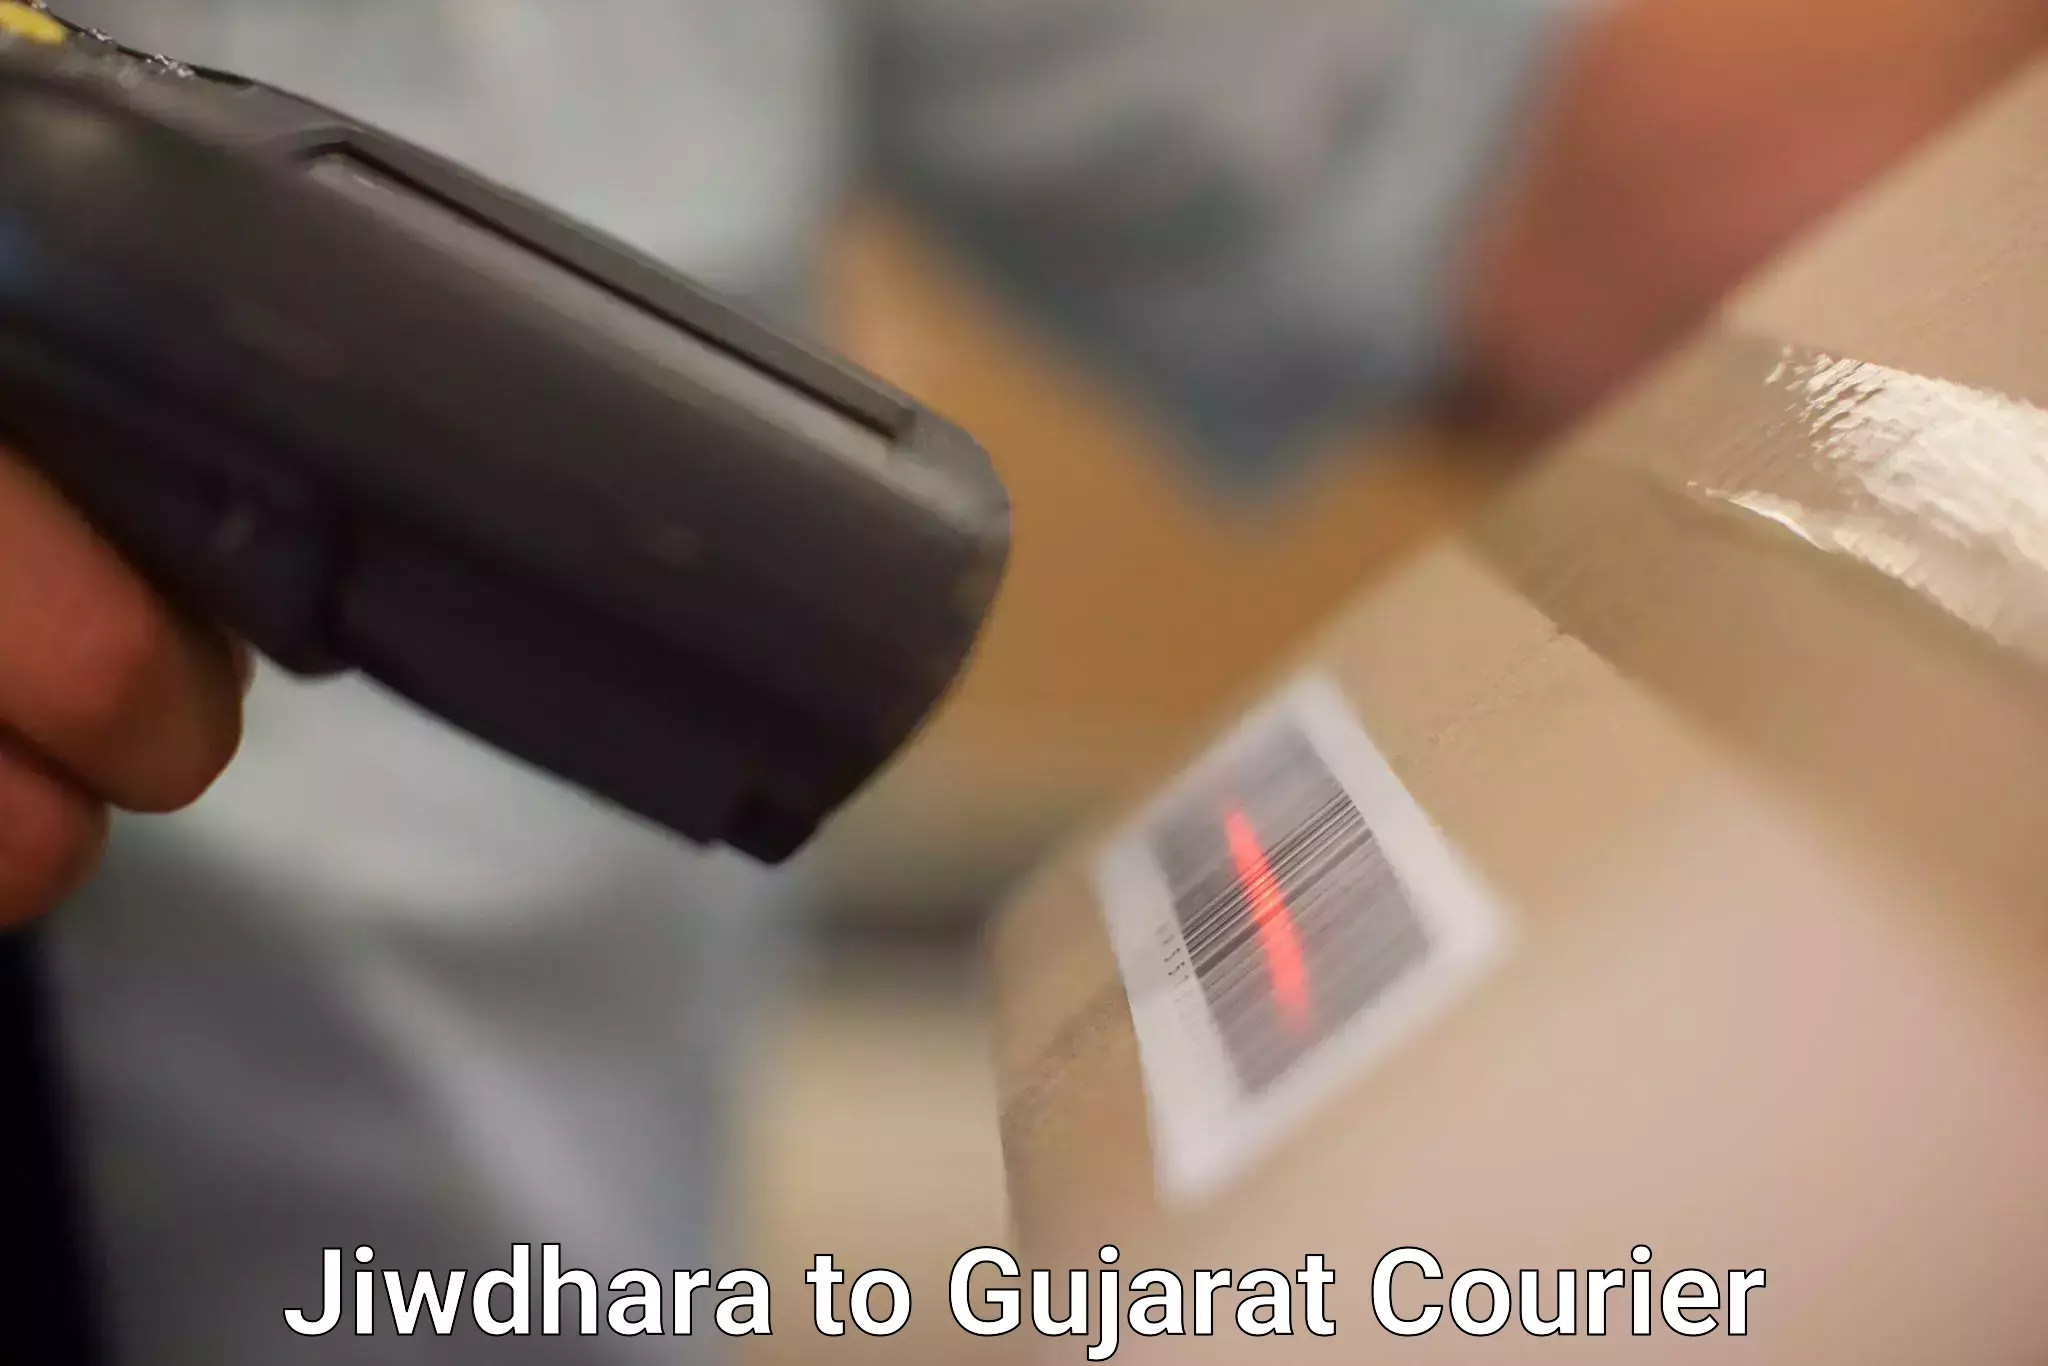 Quality courier services Jiwdhara to Bodeli